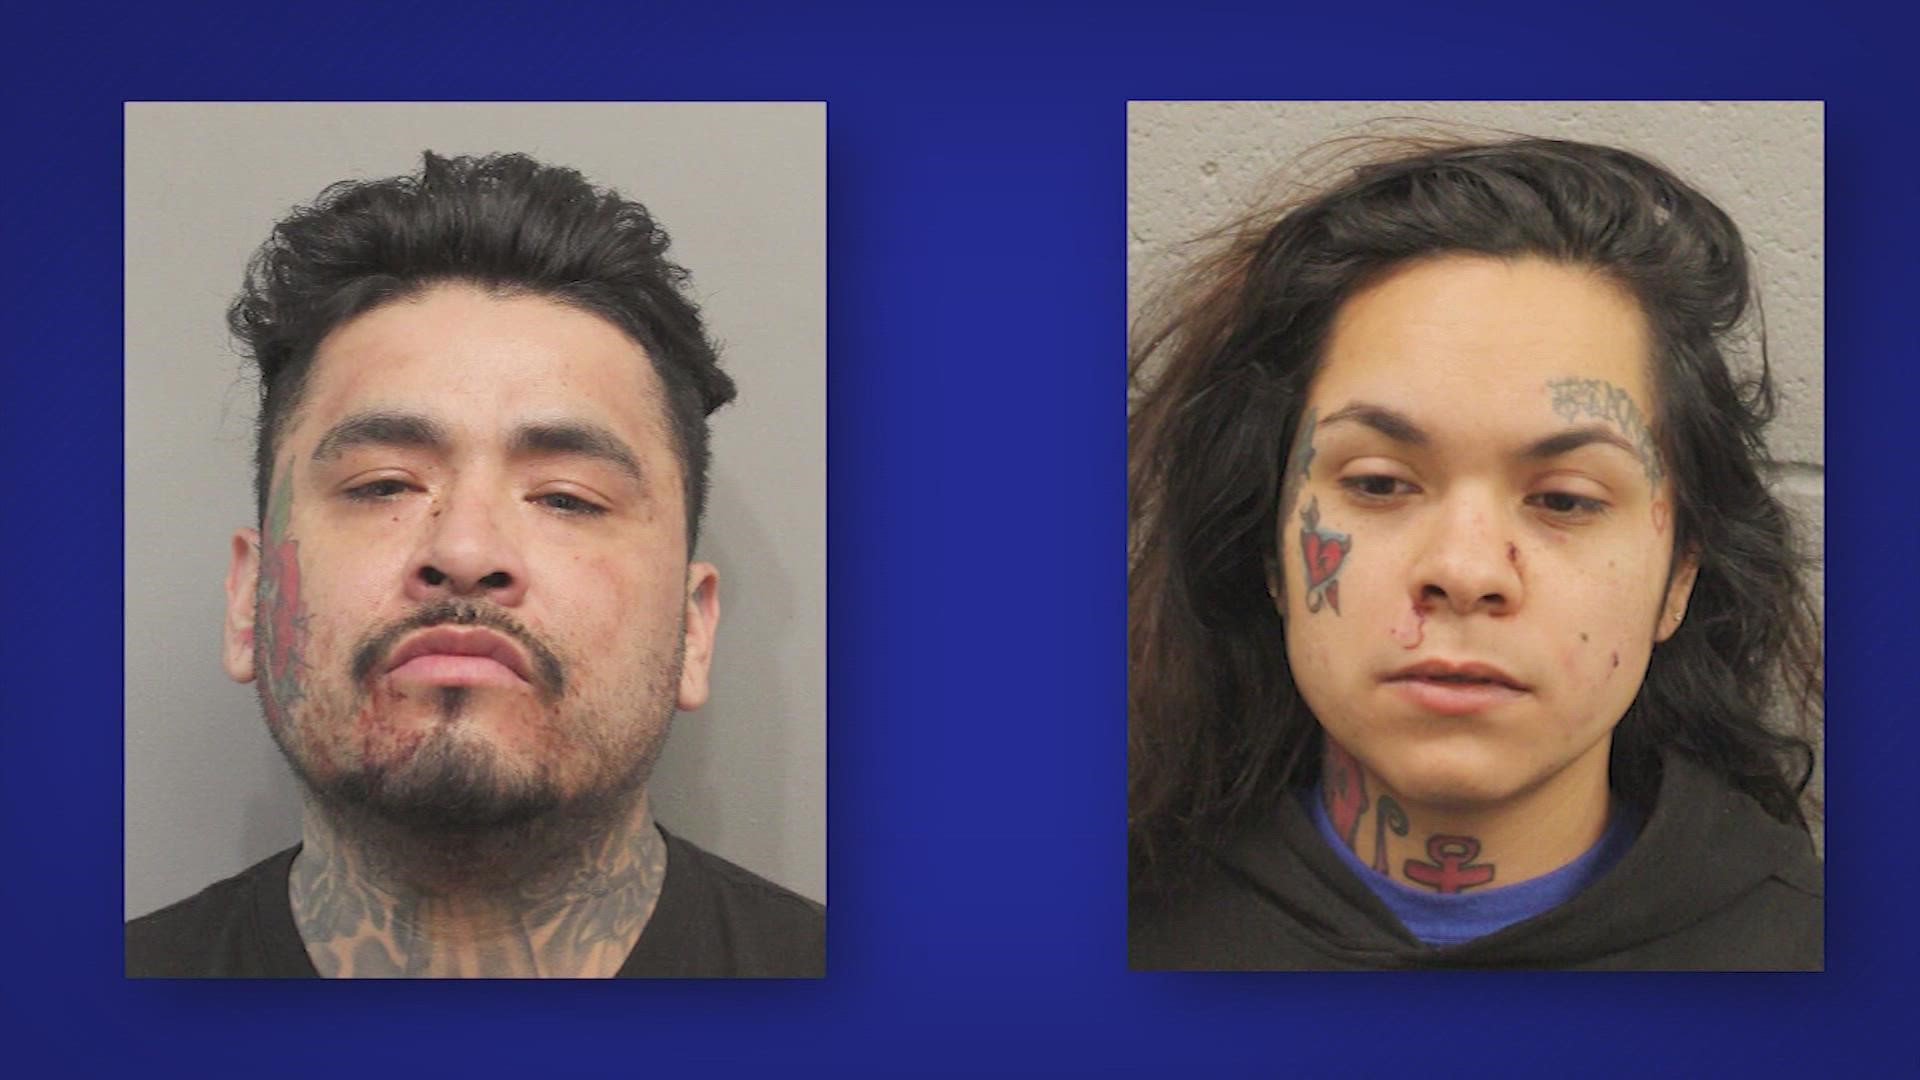 Felix Vale was convicted of aggravated sexual assault. Also charged in the crime is Ariel Cordoba, who has pleaded guilty and is awaiting sentencing.